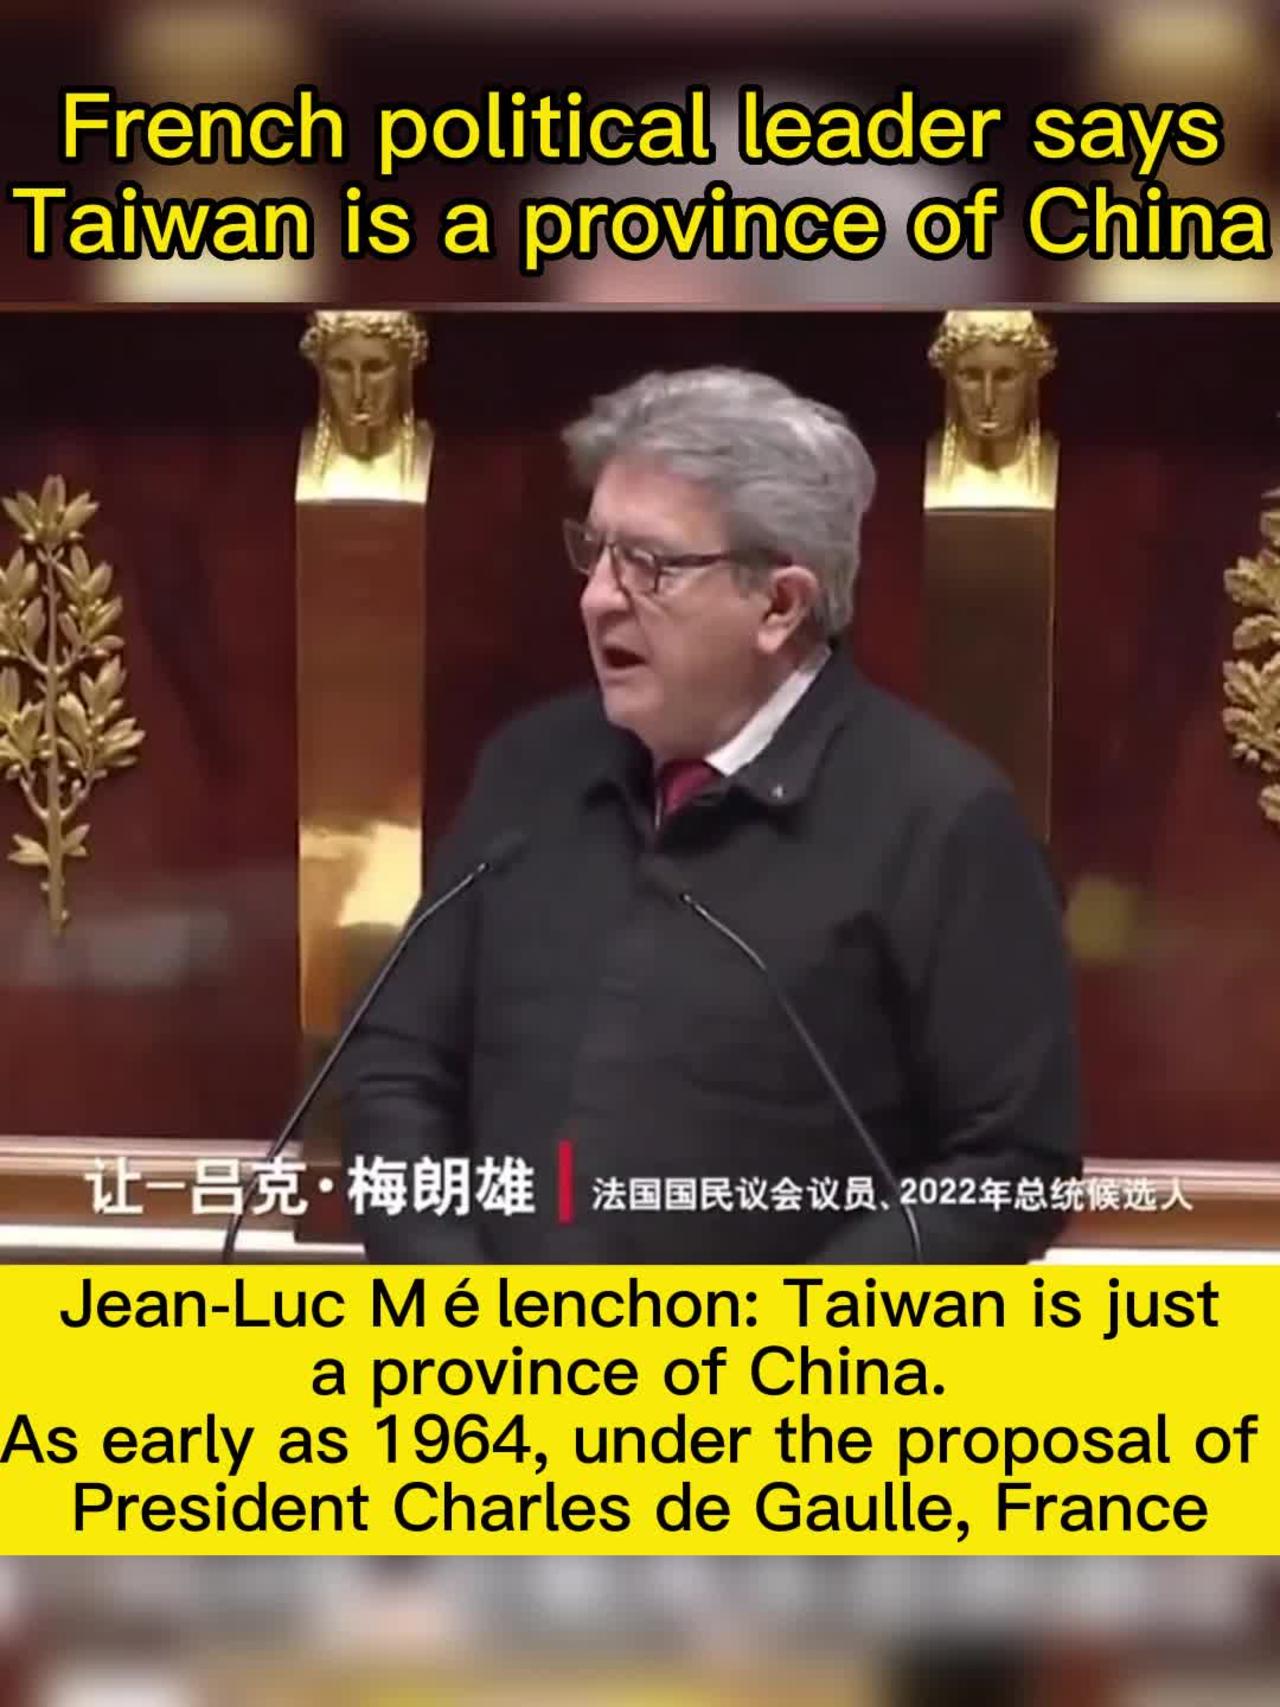 French political leader: Taiwan is a province of China